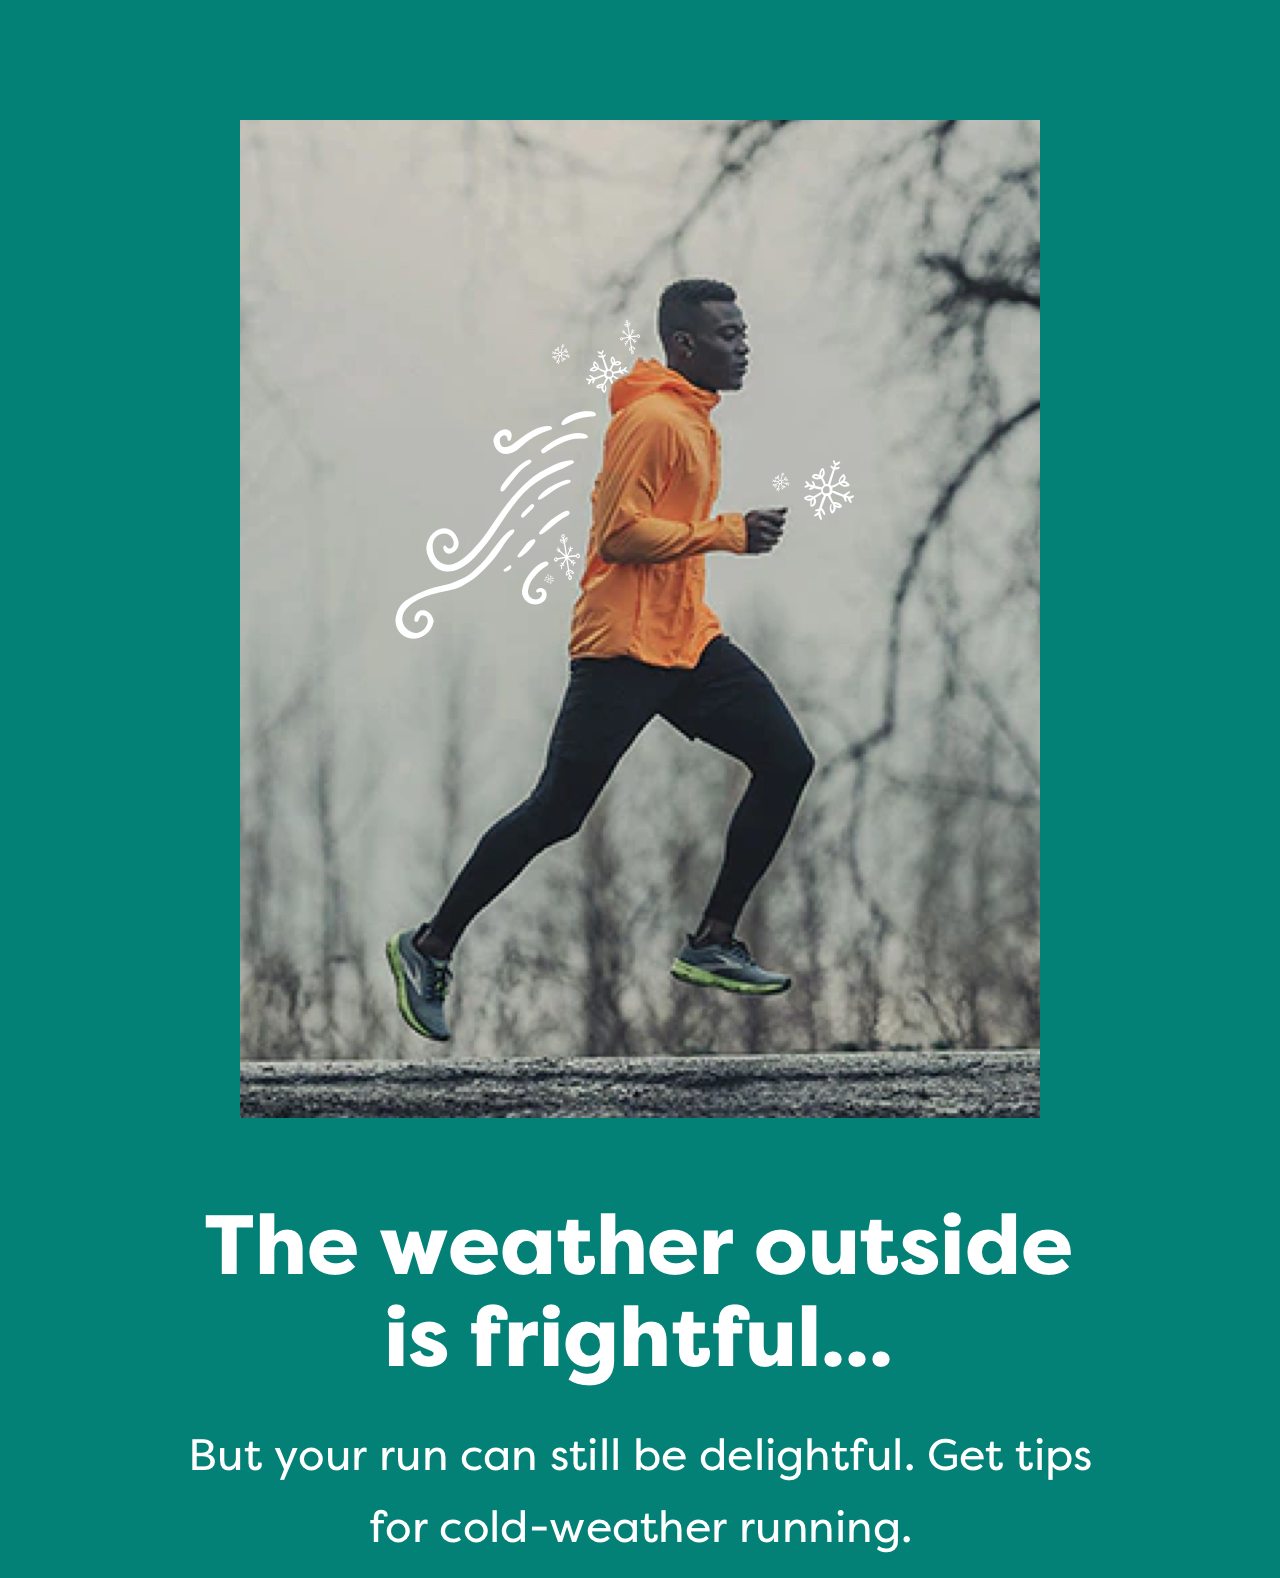 The weather outside is frightful... But your run can still be delightful. Get tips for cold-weather running.